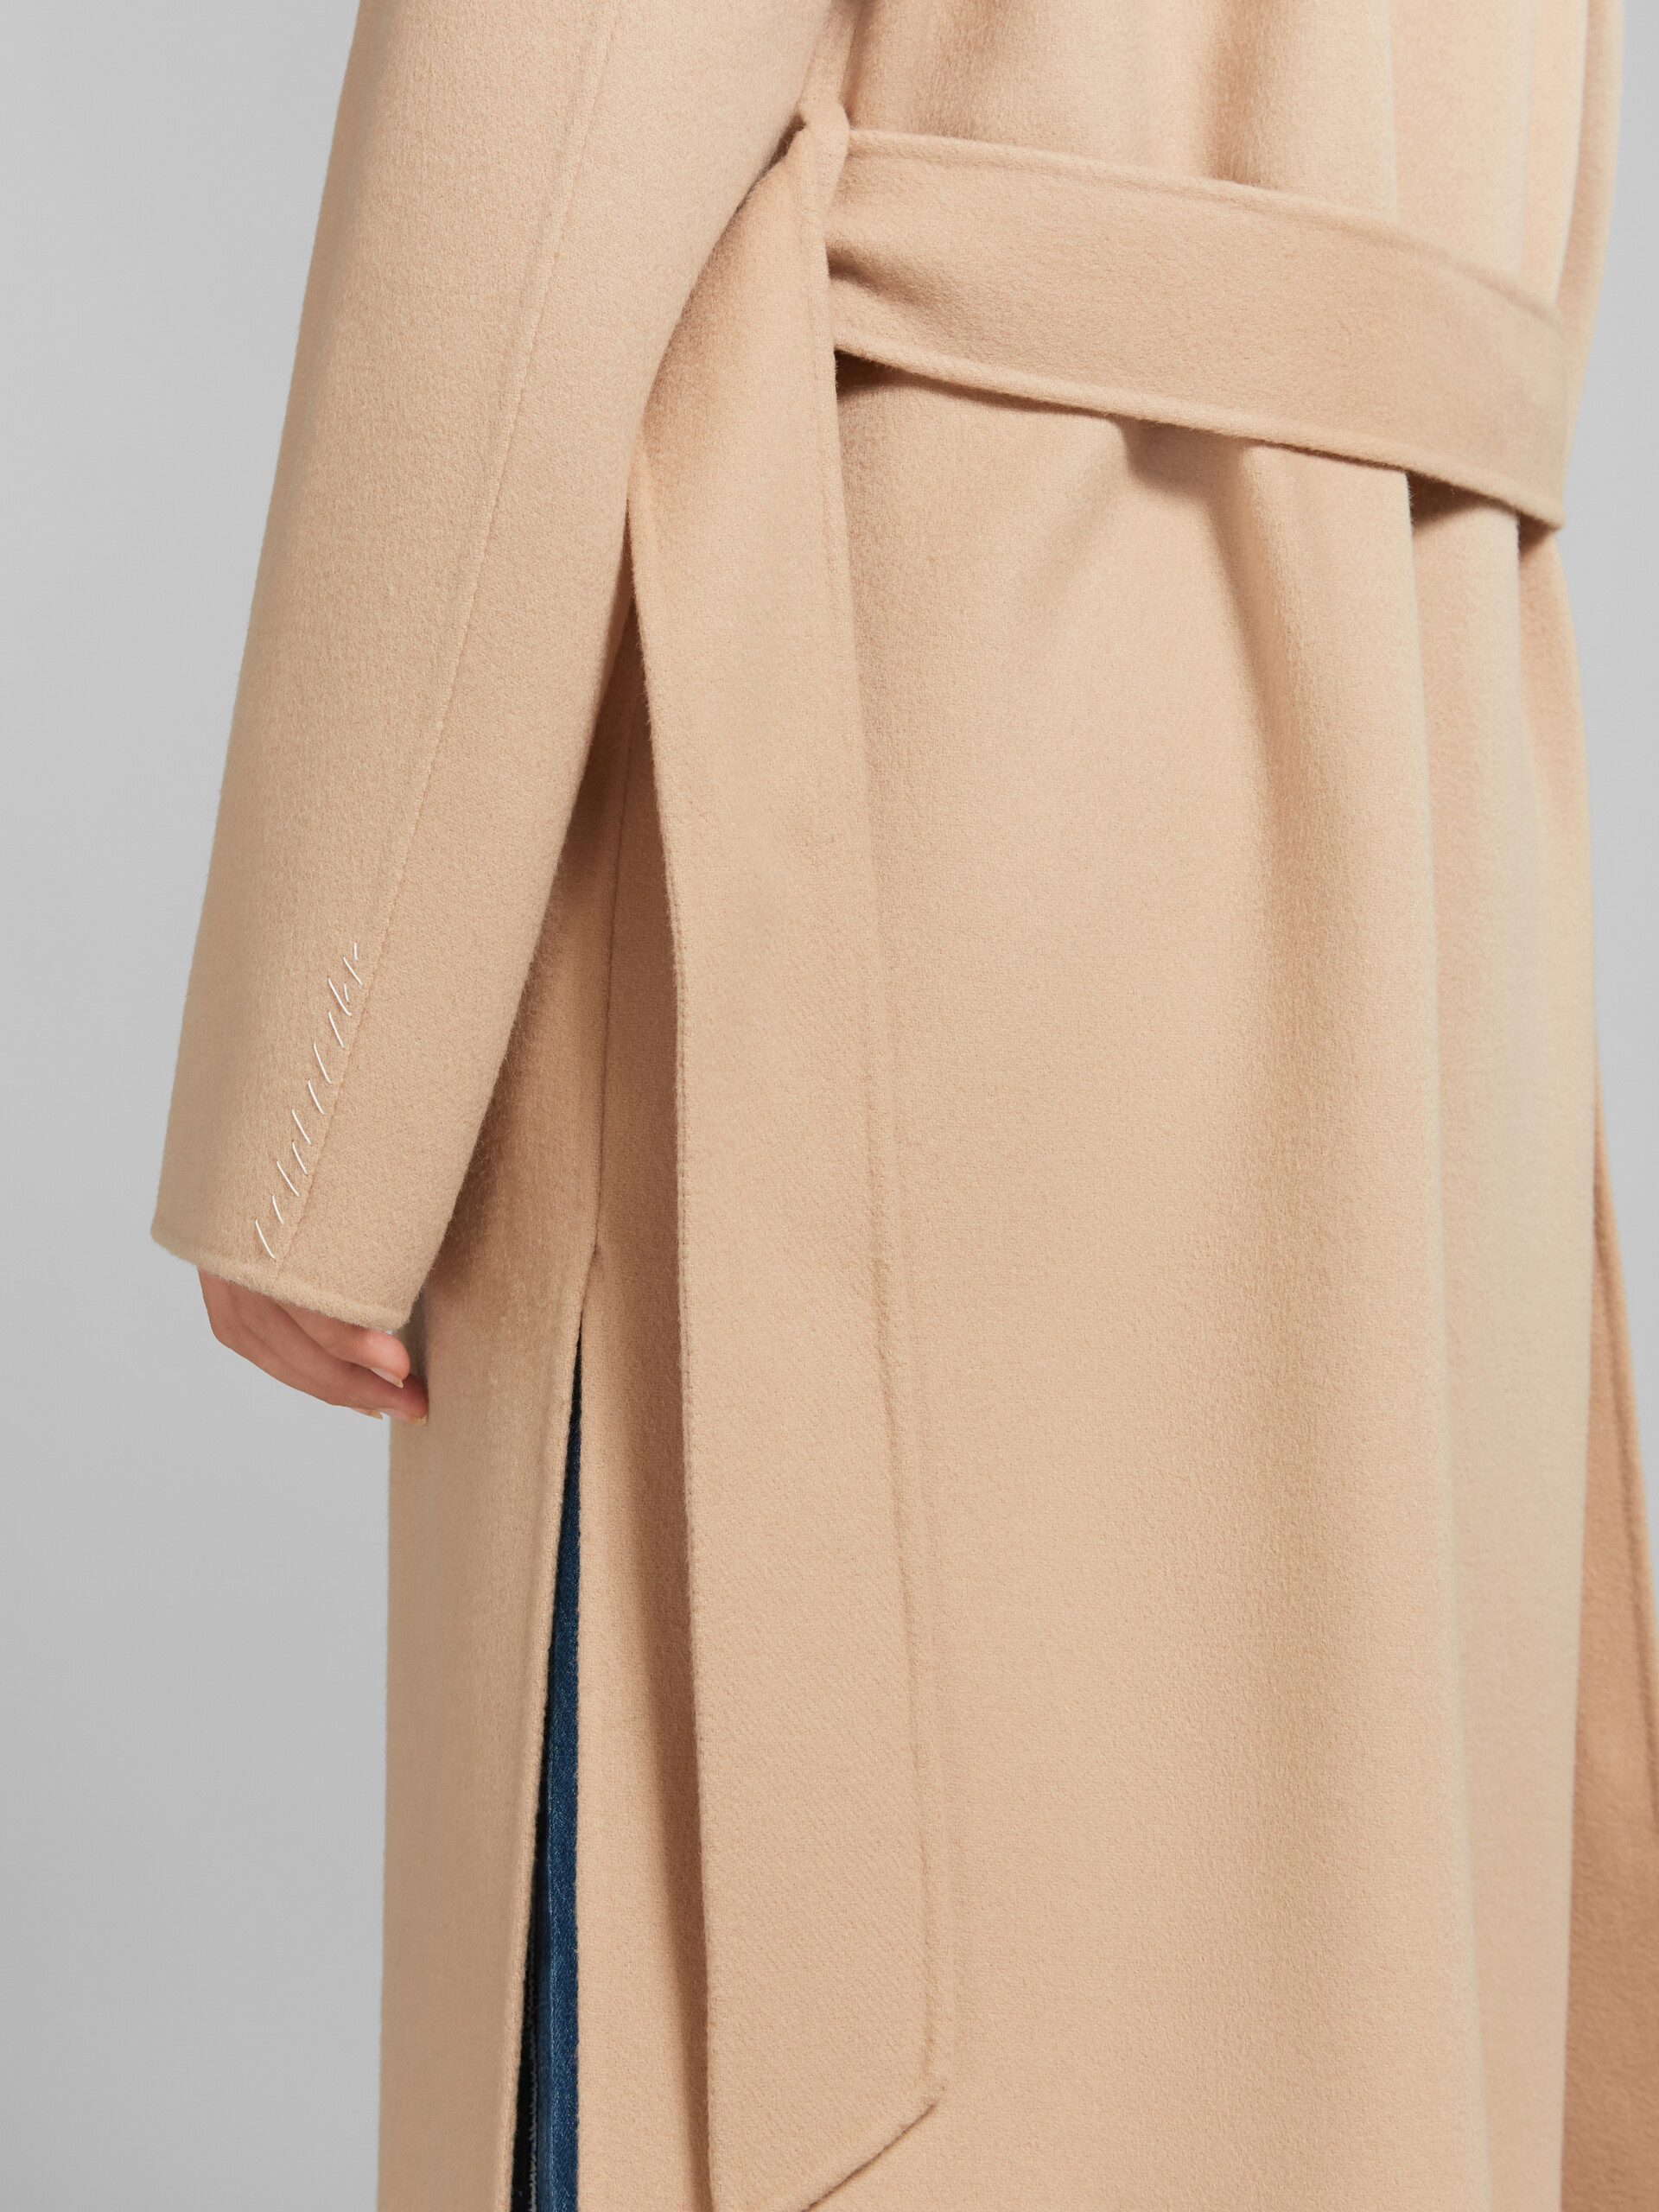 Camel wool and cashmere trench coat - Coat - Image 5